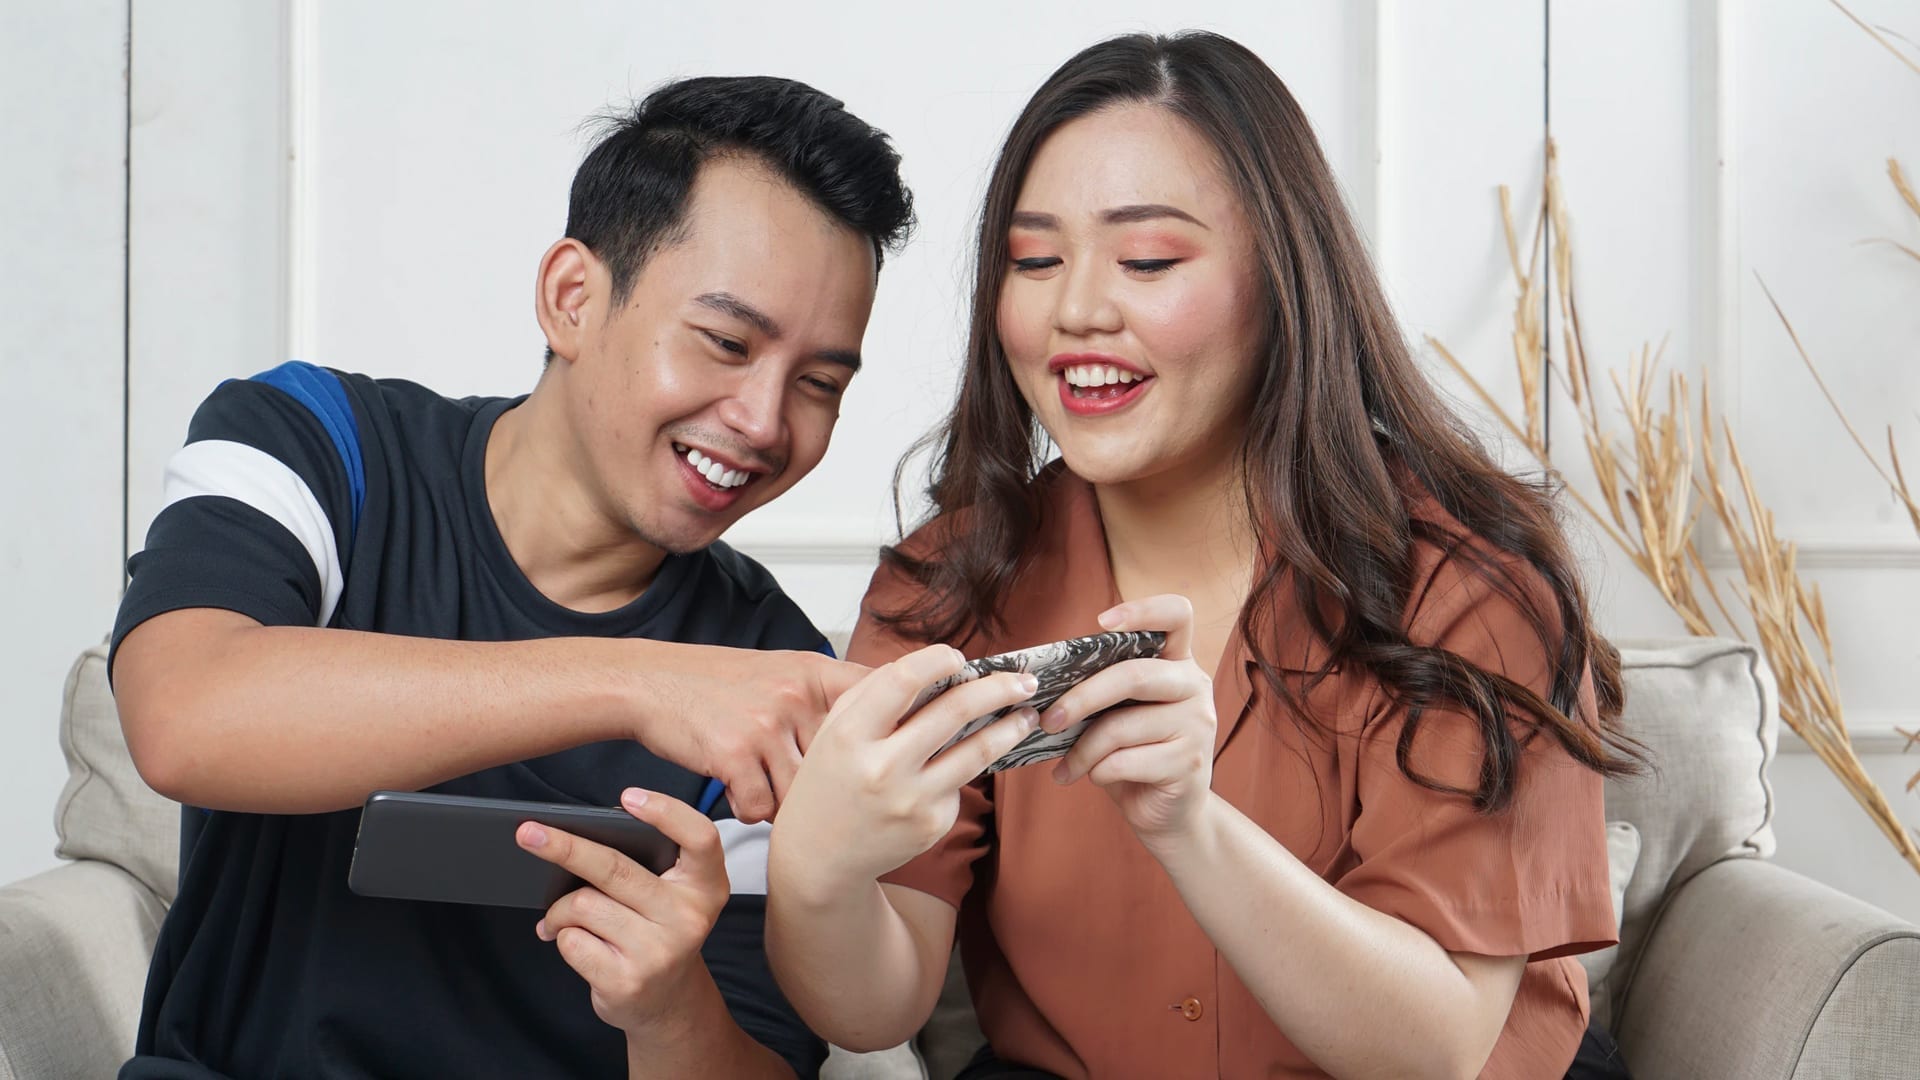 Esports Rising Shows That Gaming Keeps Growing - photo of man and woman gaming on their phones